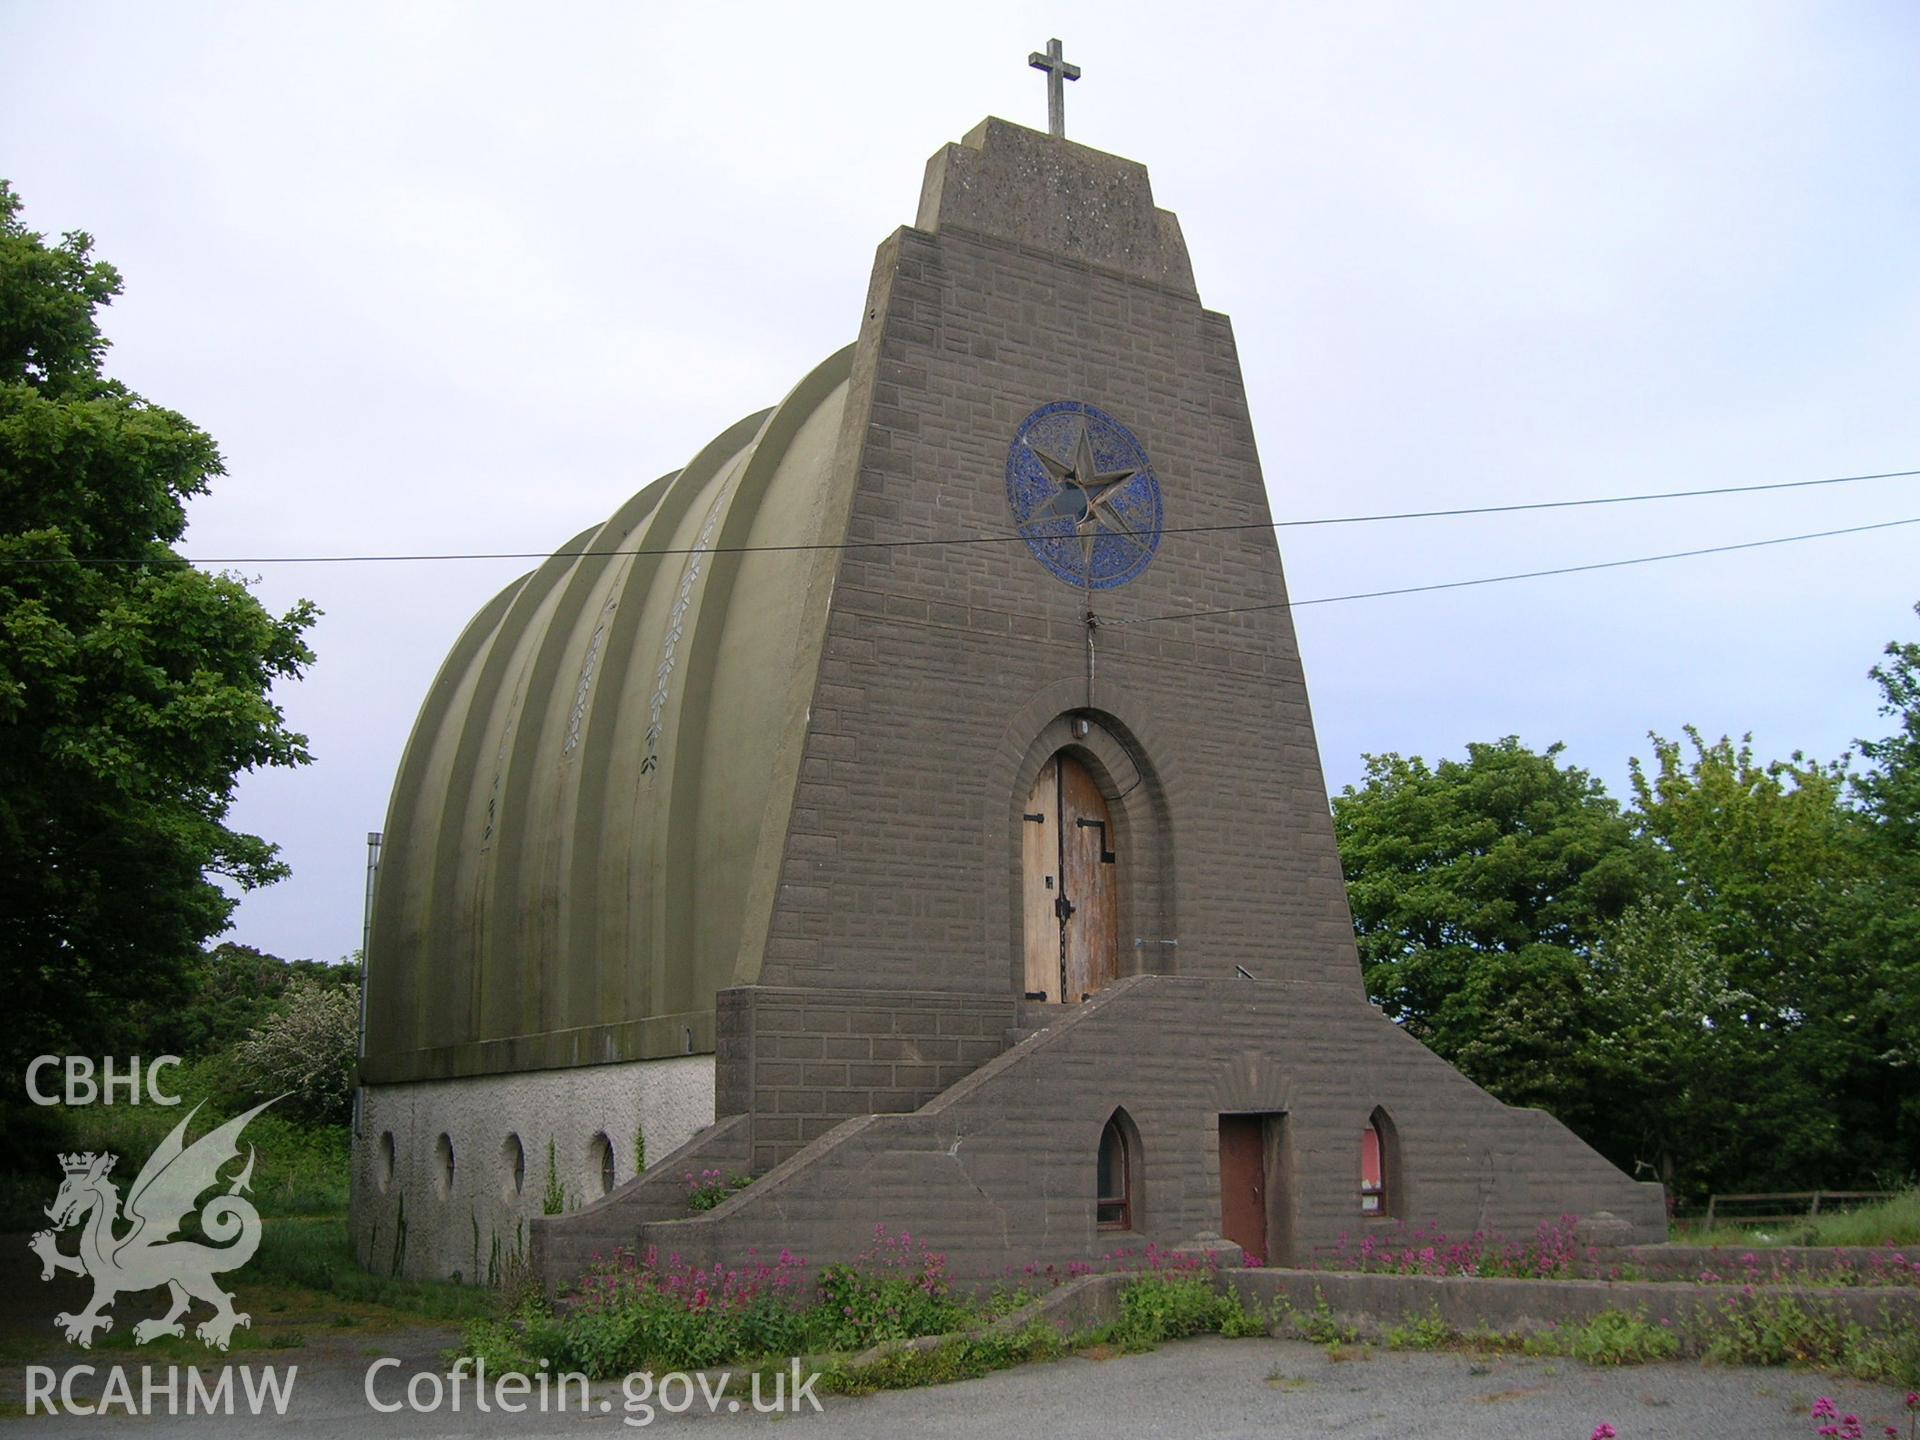 Digital photograph of the Church of Our Lady Star of the Sea.